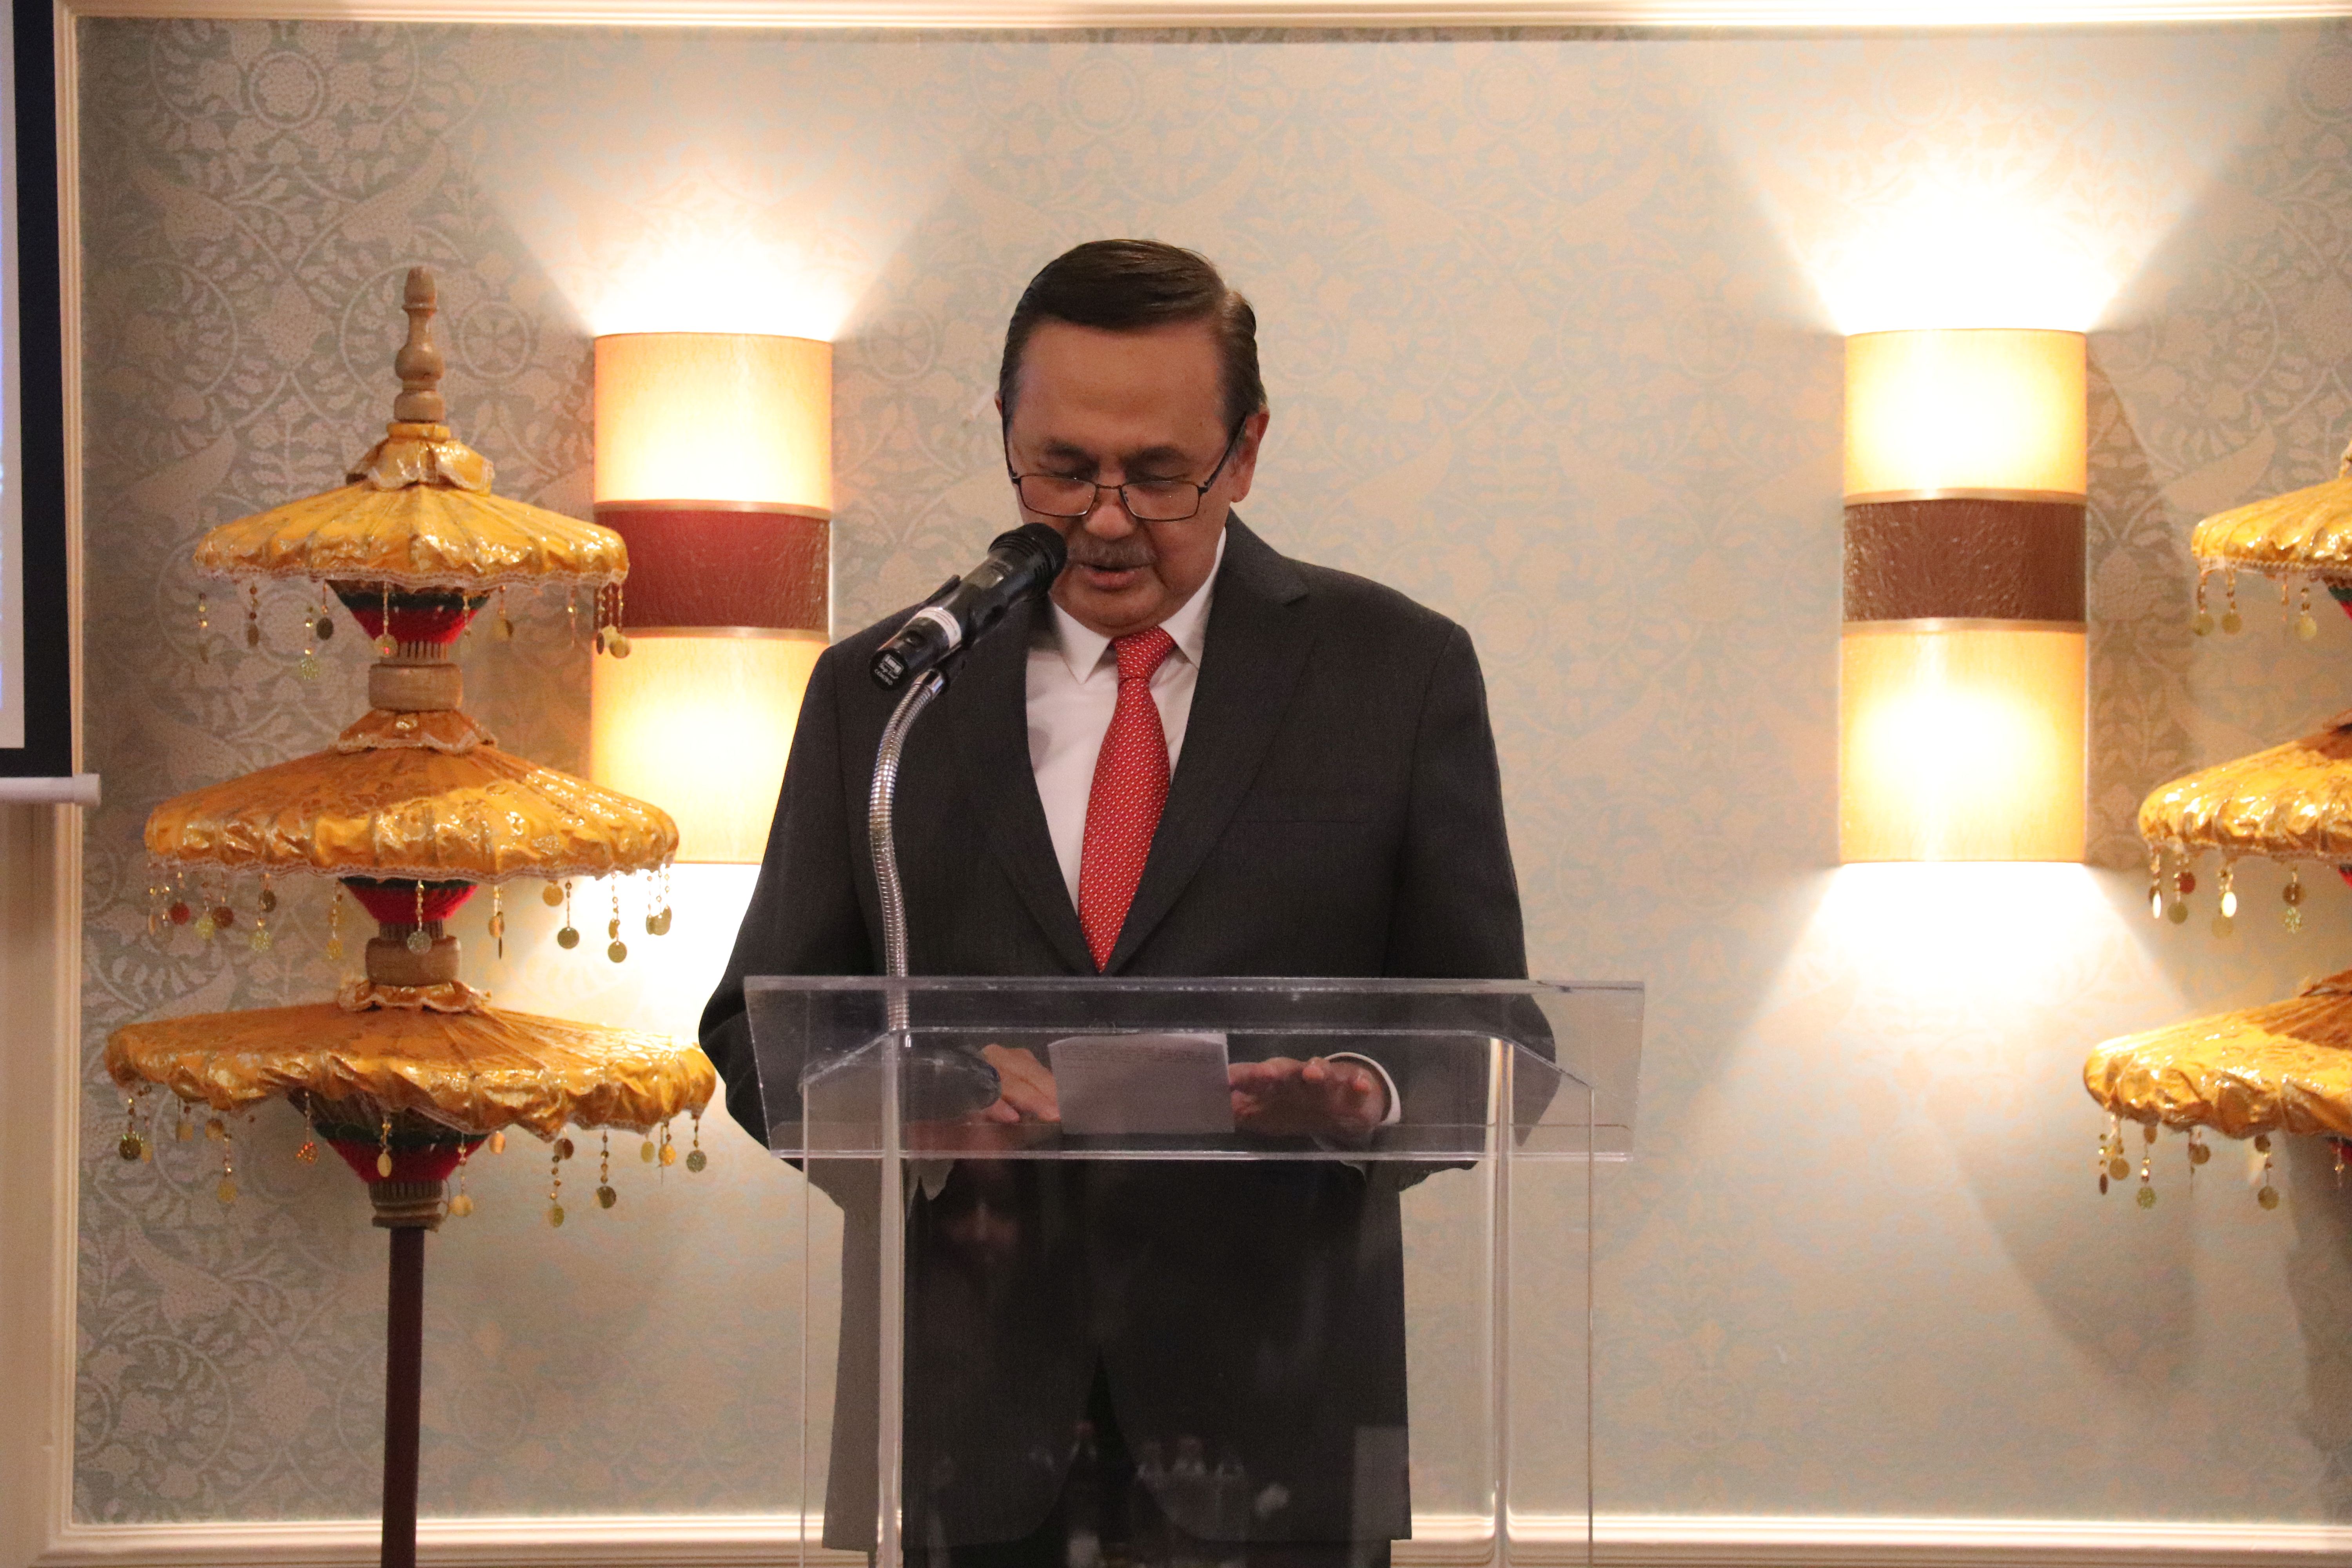 Opening remarks by H.E. A.H. Dimas Wahab Ambassador of Republic of Indonesia to Hungary